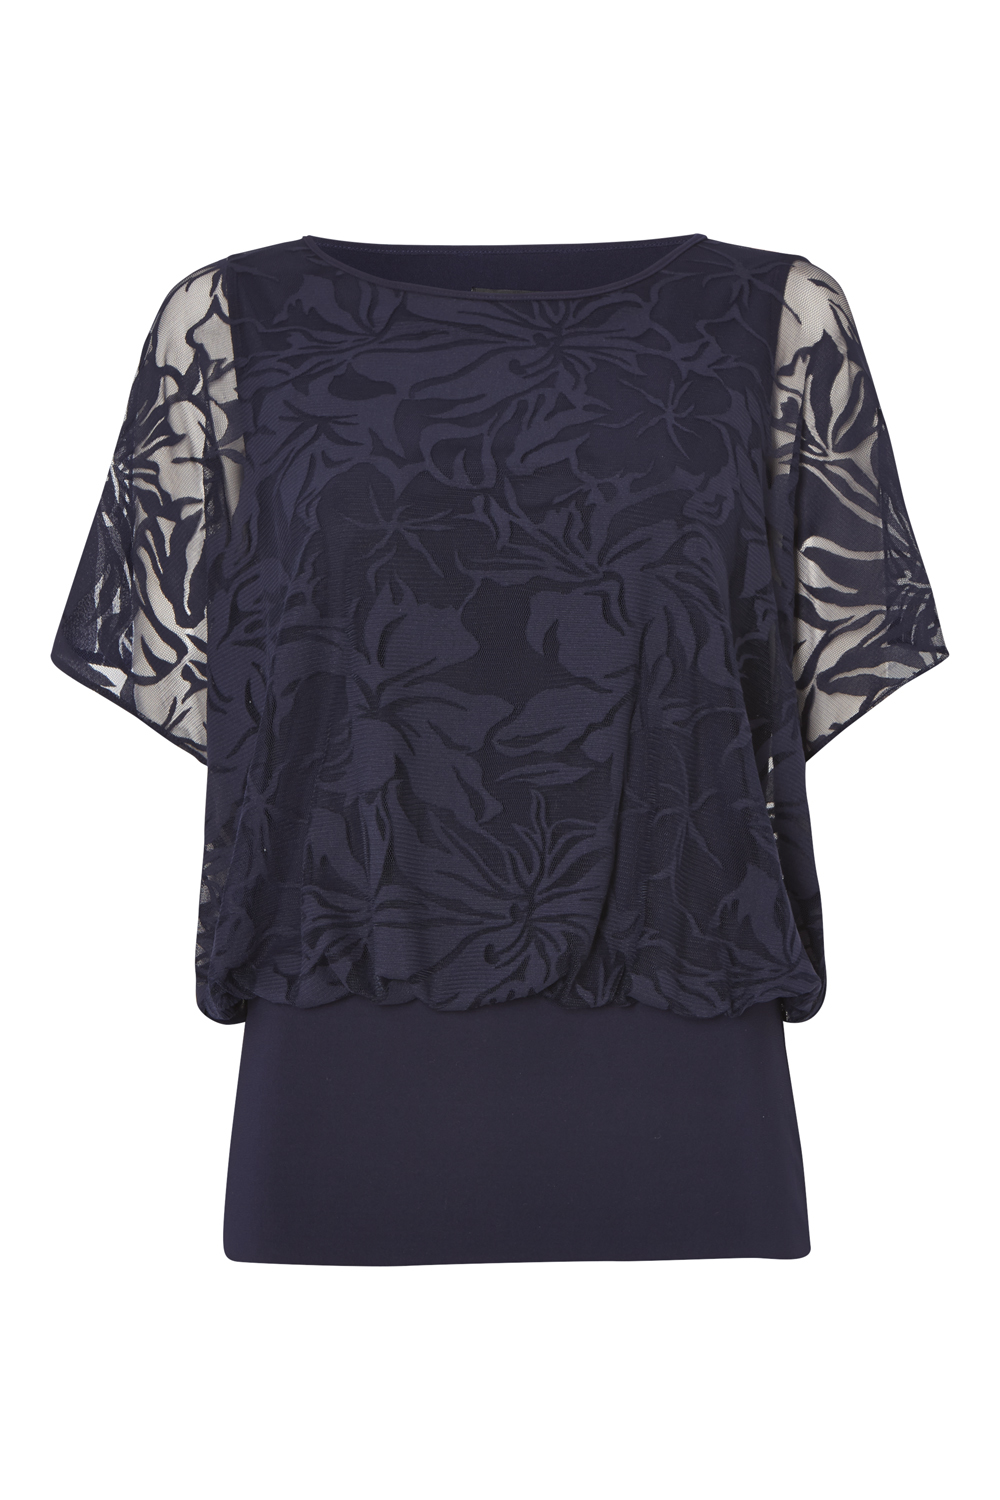 Navy  Floral Double Layer Burnout Print Top, Image 4 of 4